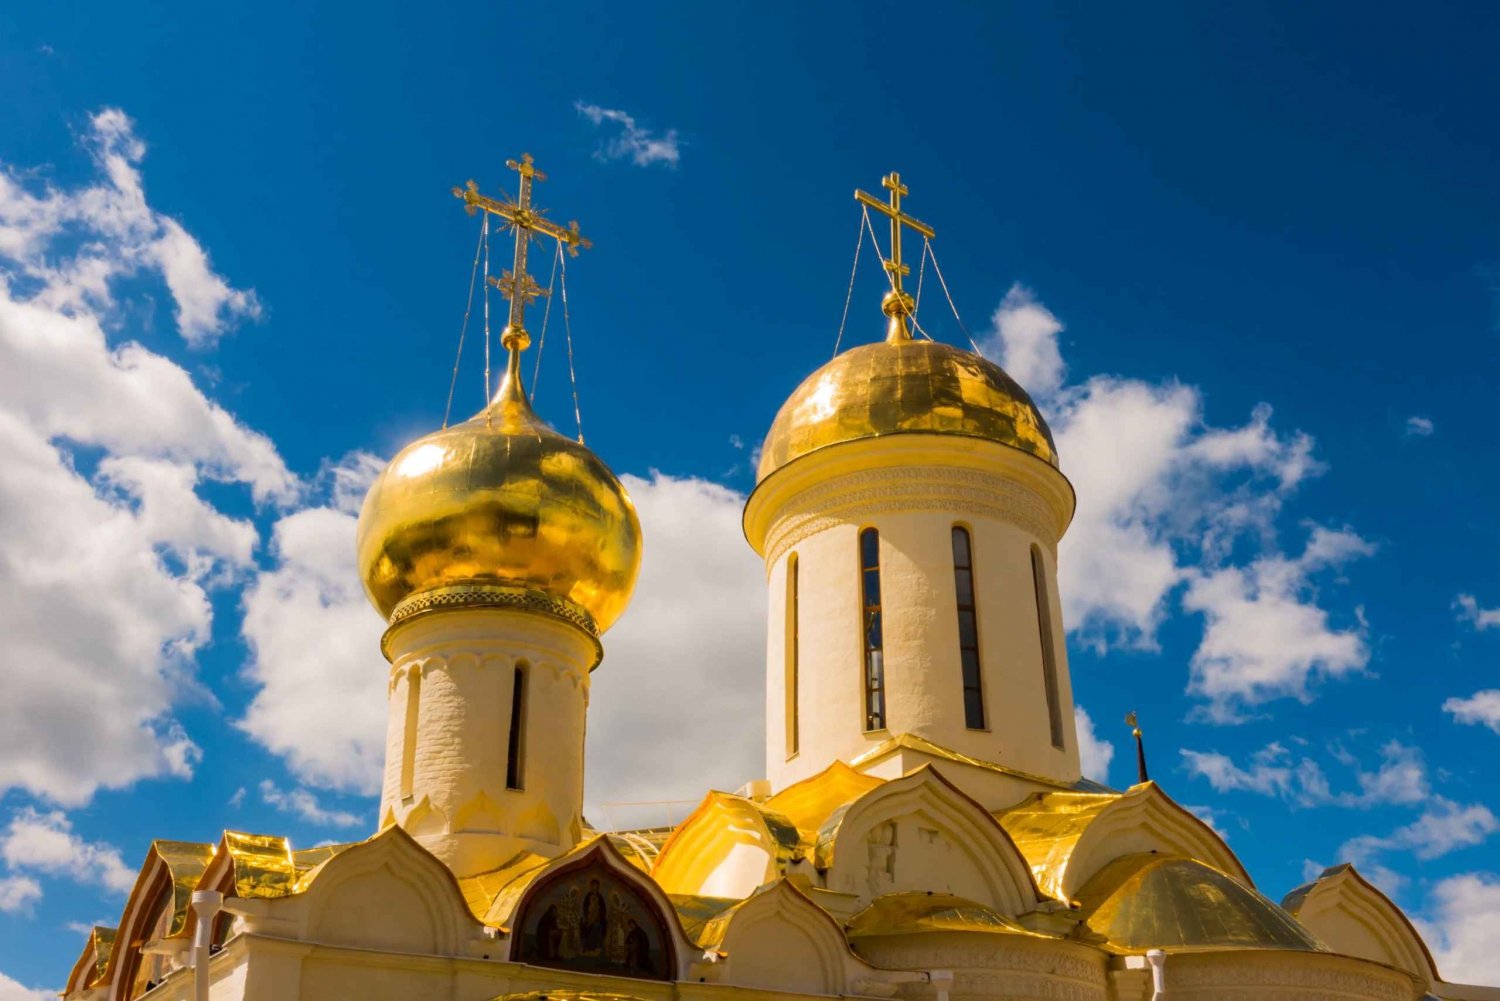 Sergiev Posad: Private Trip to the Pearl of the Golden Ring